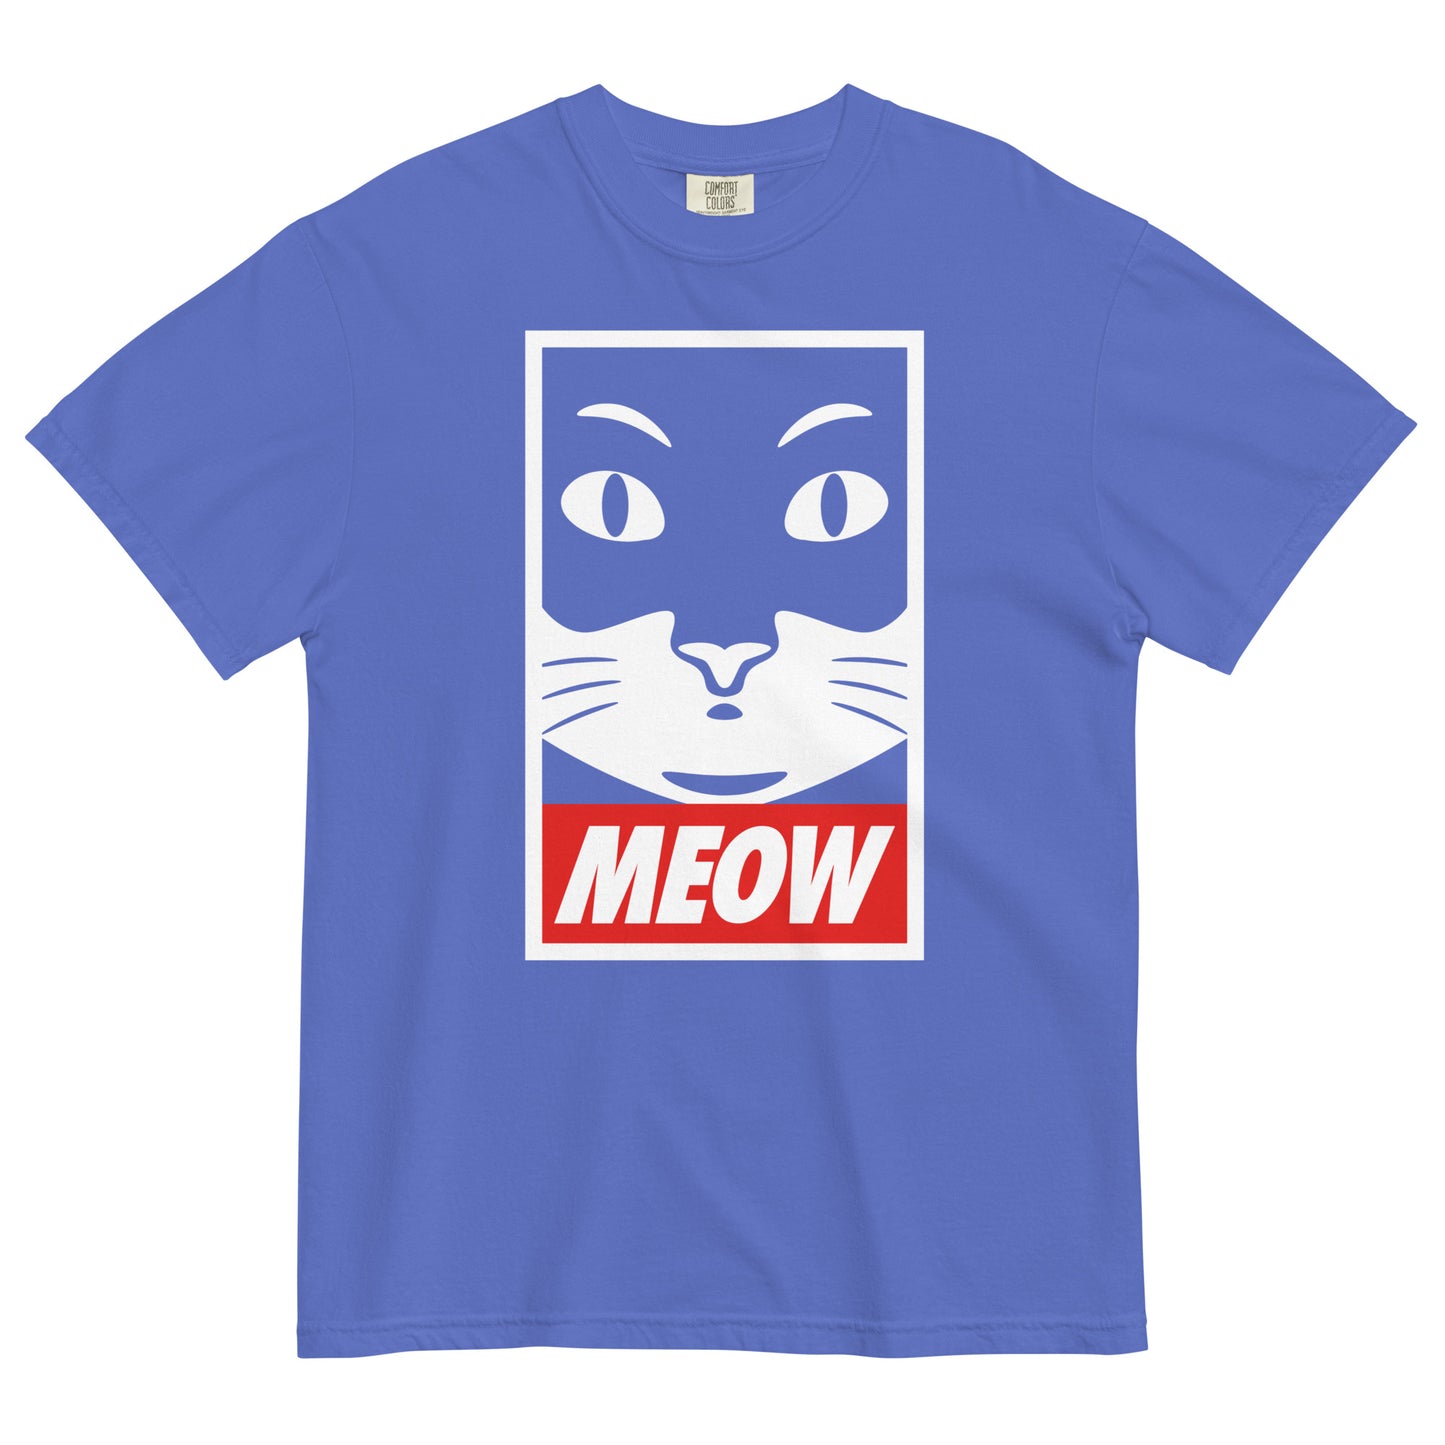 Meow Men's Relaxed Fit Tee